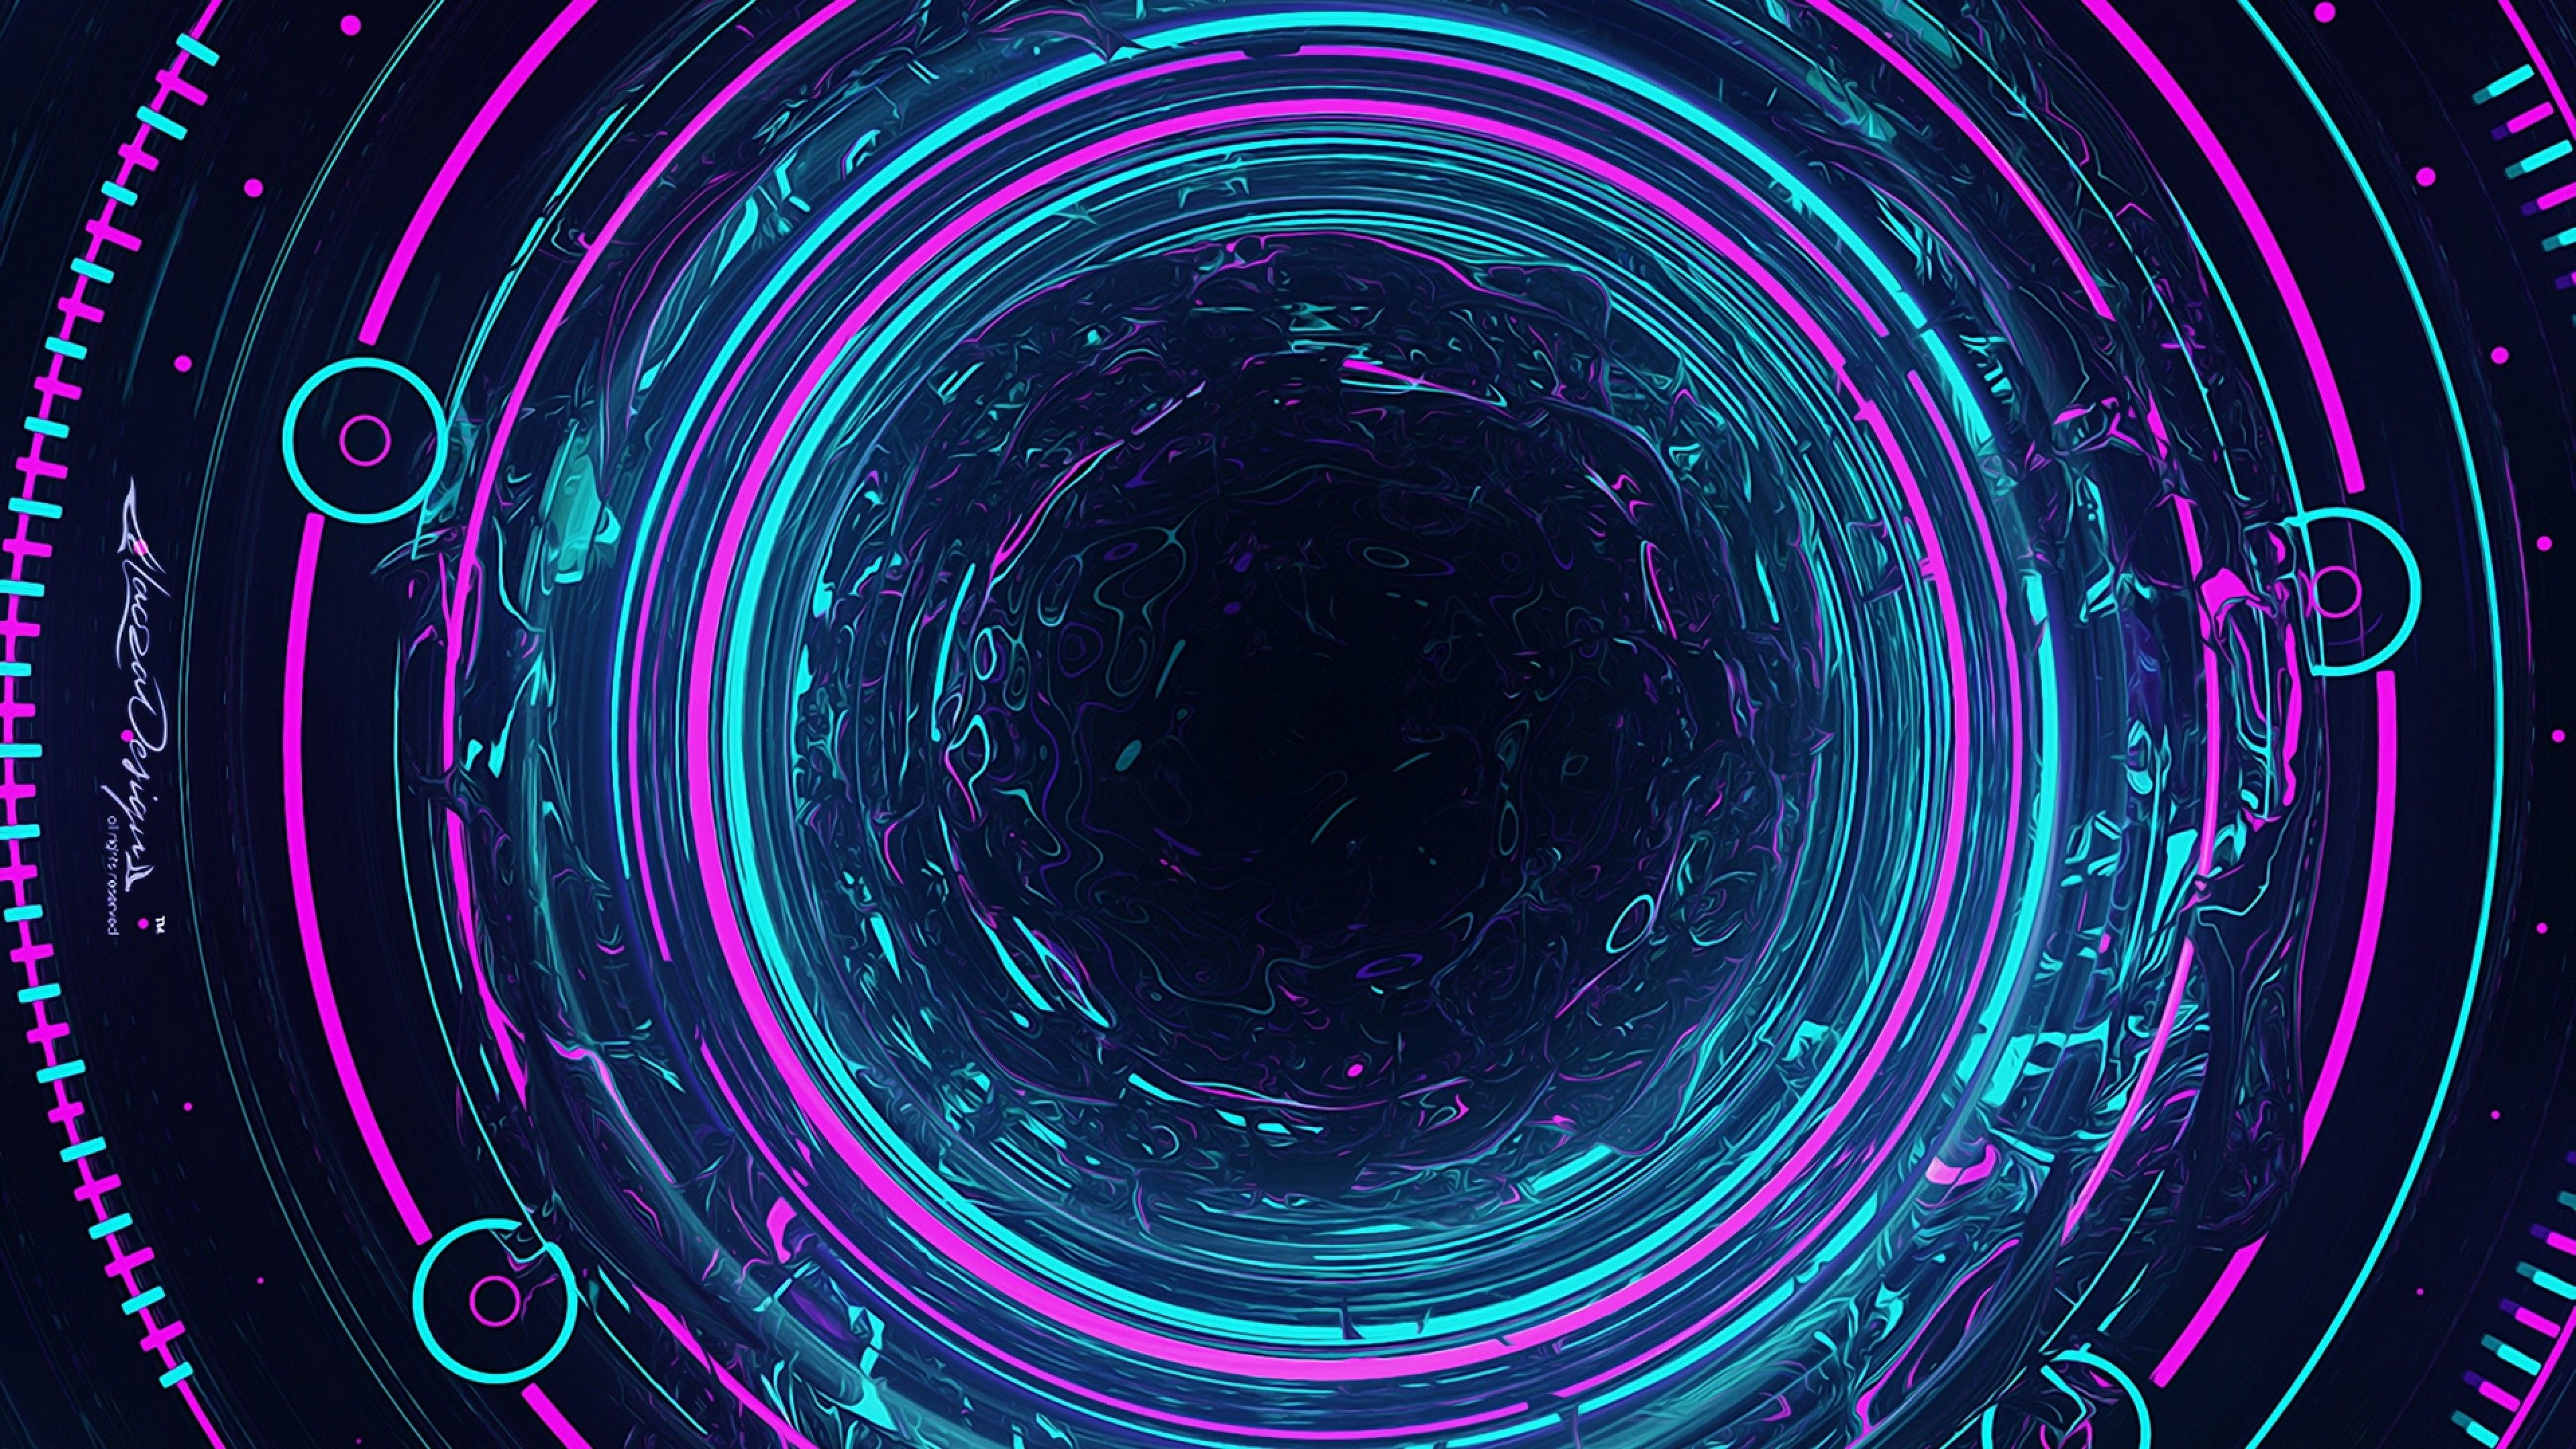 3840x2160 Download Ultra Hd Wallpapers for desktop or mobile device. Make your device cooler and more beautiful. | Purple wallpaper, Black and blue wallpaper, Hd wallpaper